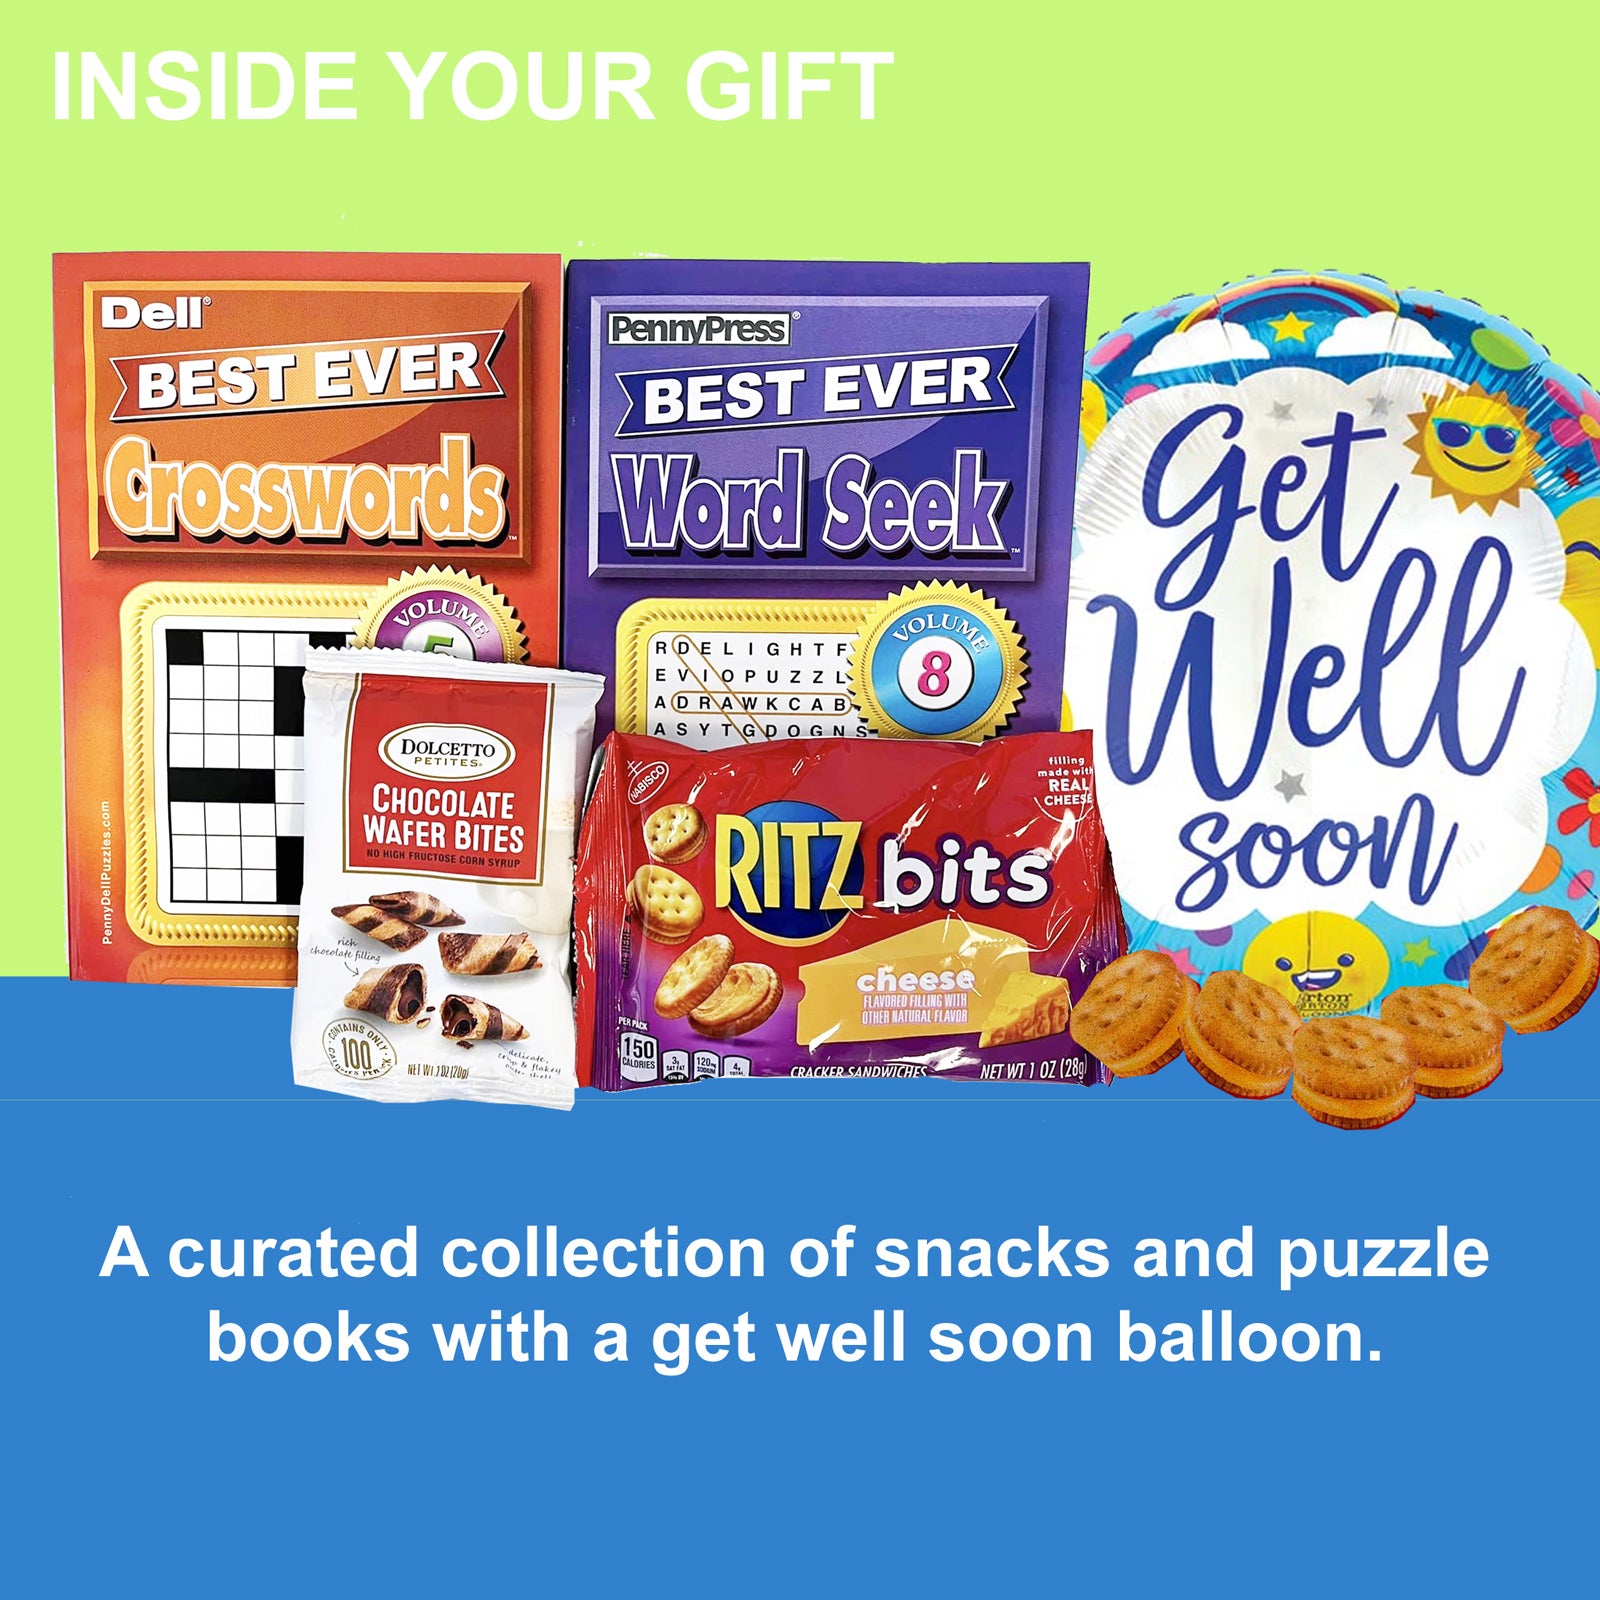 Get Well Soon Relaxation Gifts